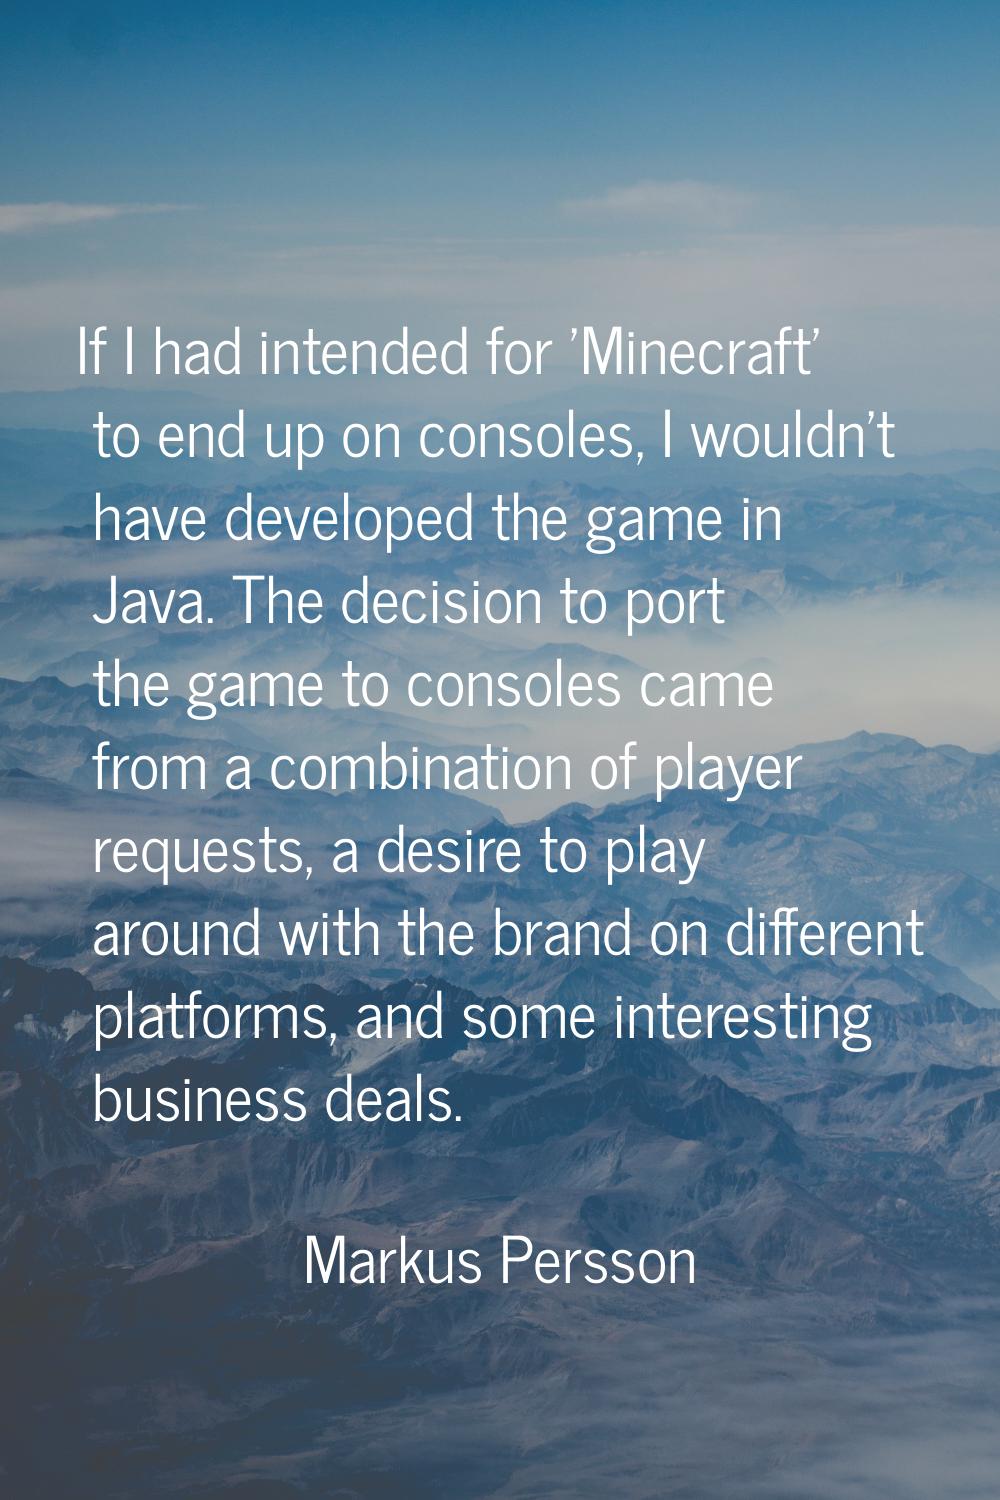 If I had intended for 'Minecraft' to end up on consoles, I wouldn't have developed the game in Java